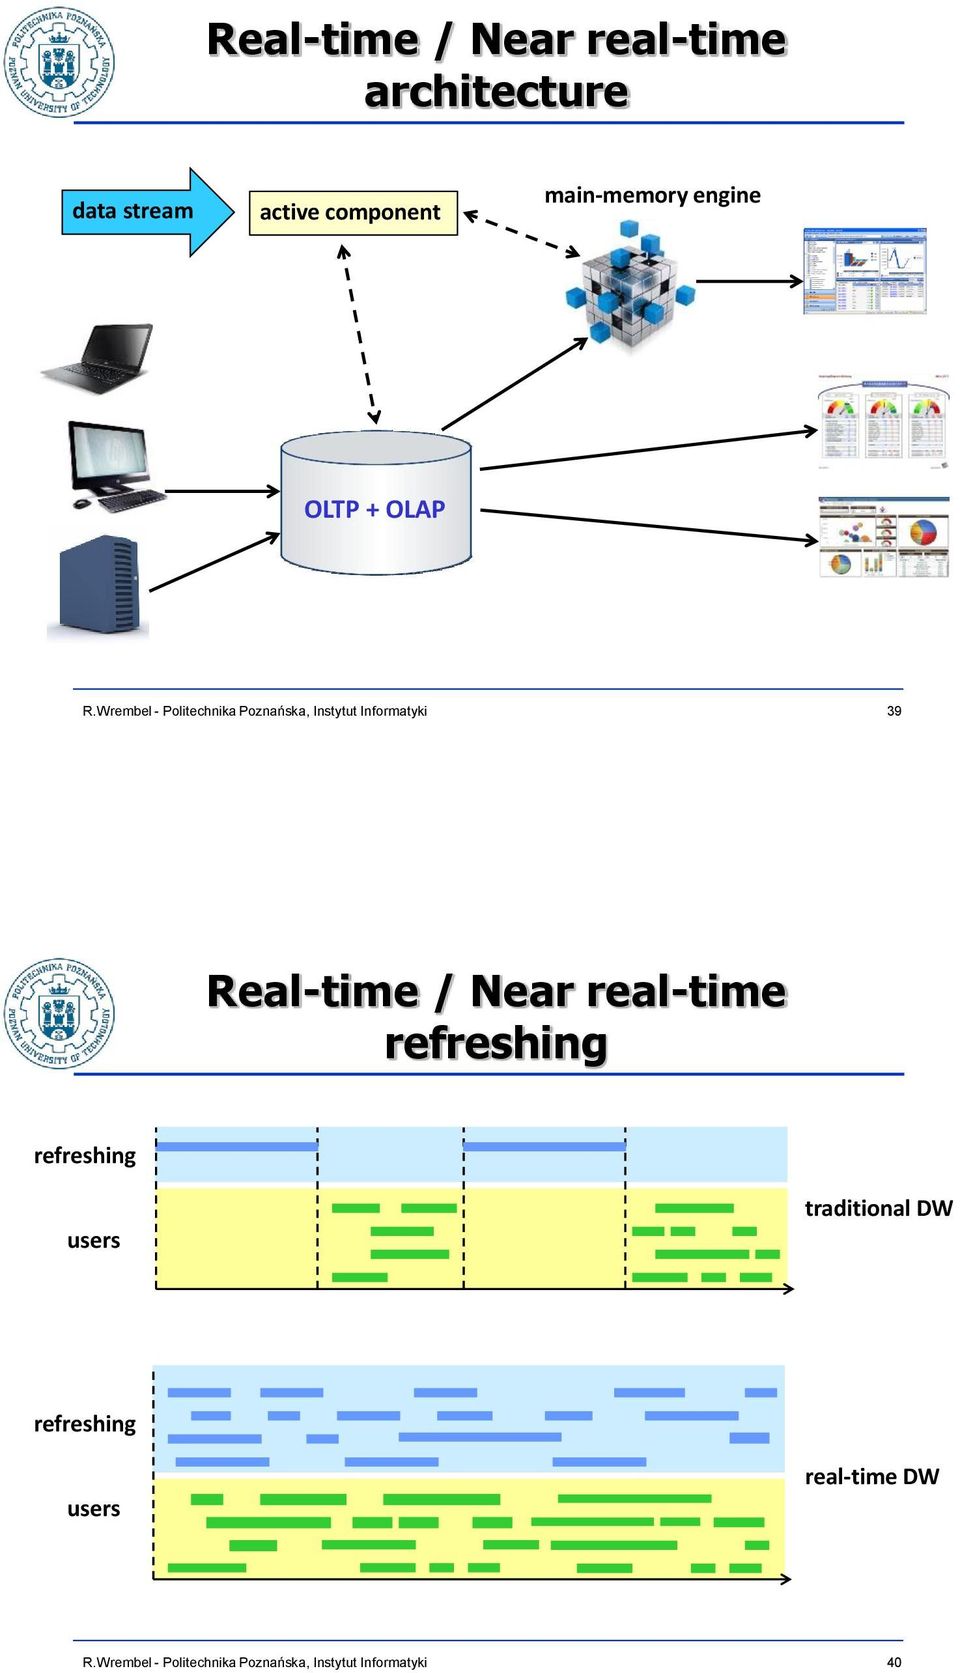 Real-time / Near real-time refreshing refreshing